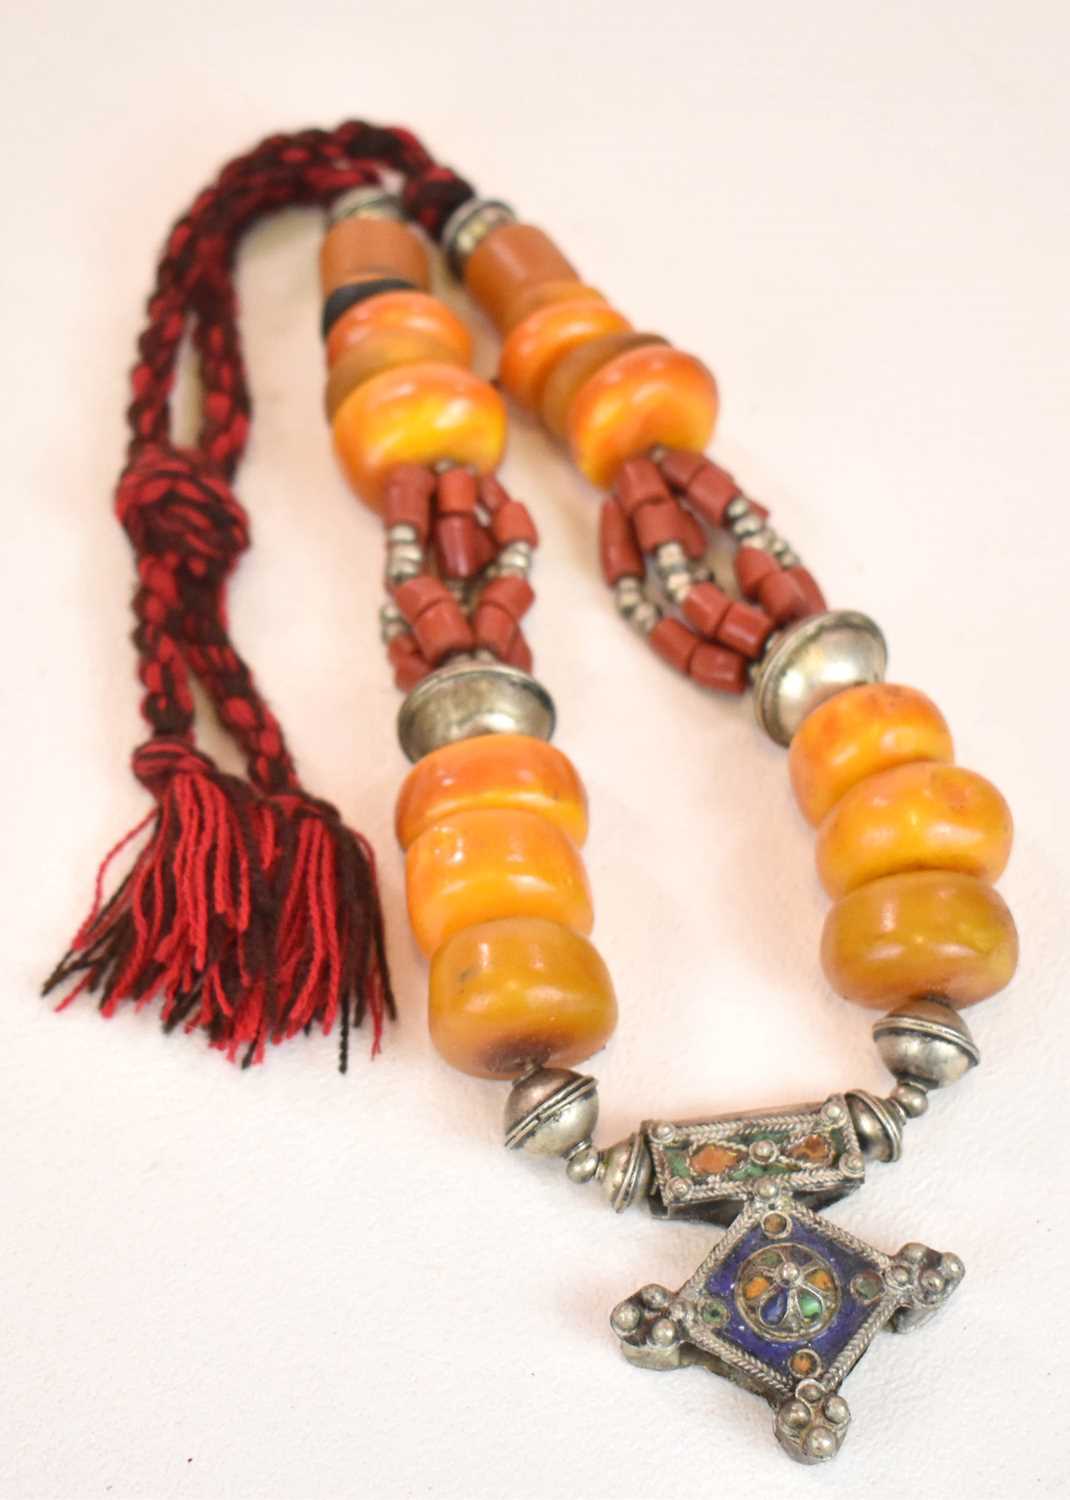 A Sudanese amber white metal and cloth necklace set with several large pieces of eggyolk/ - Image 2 of 2